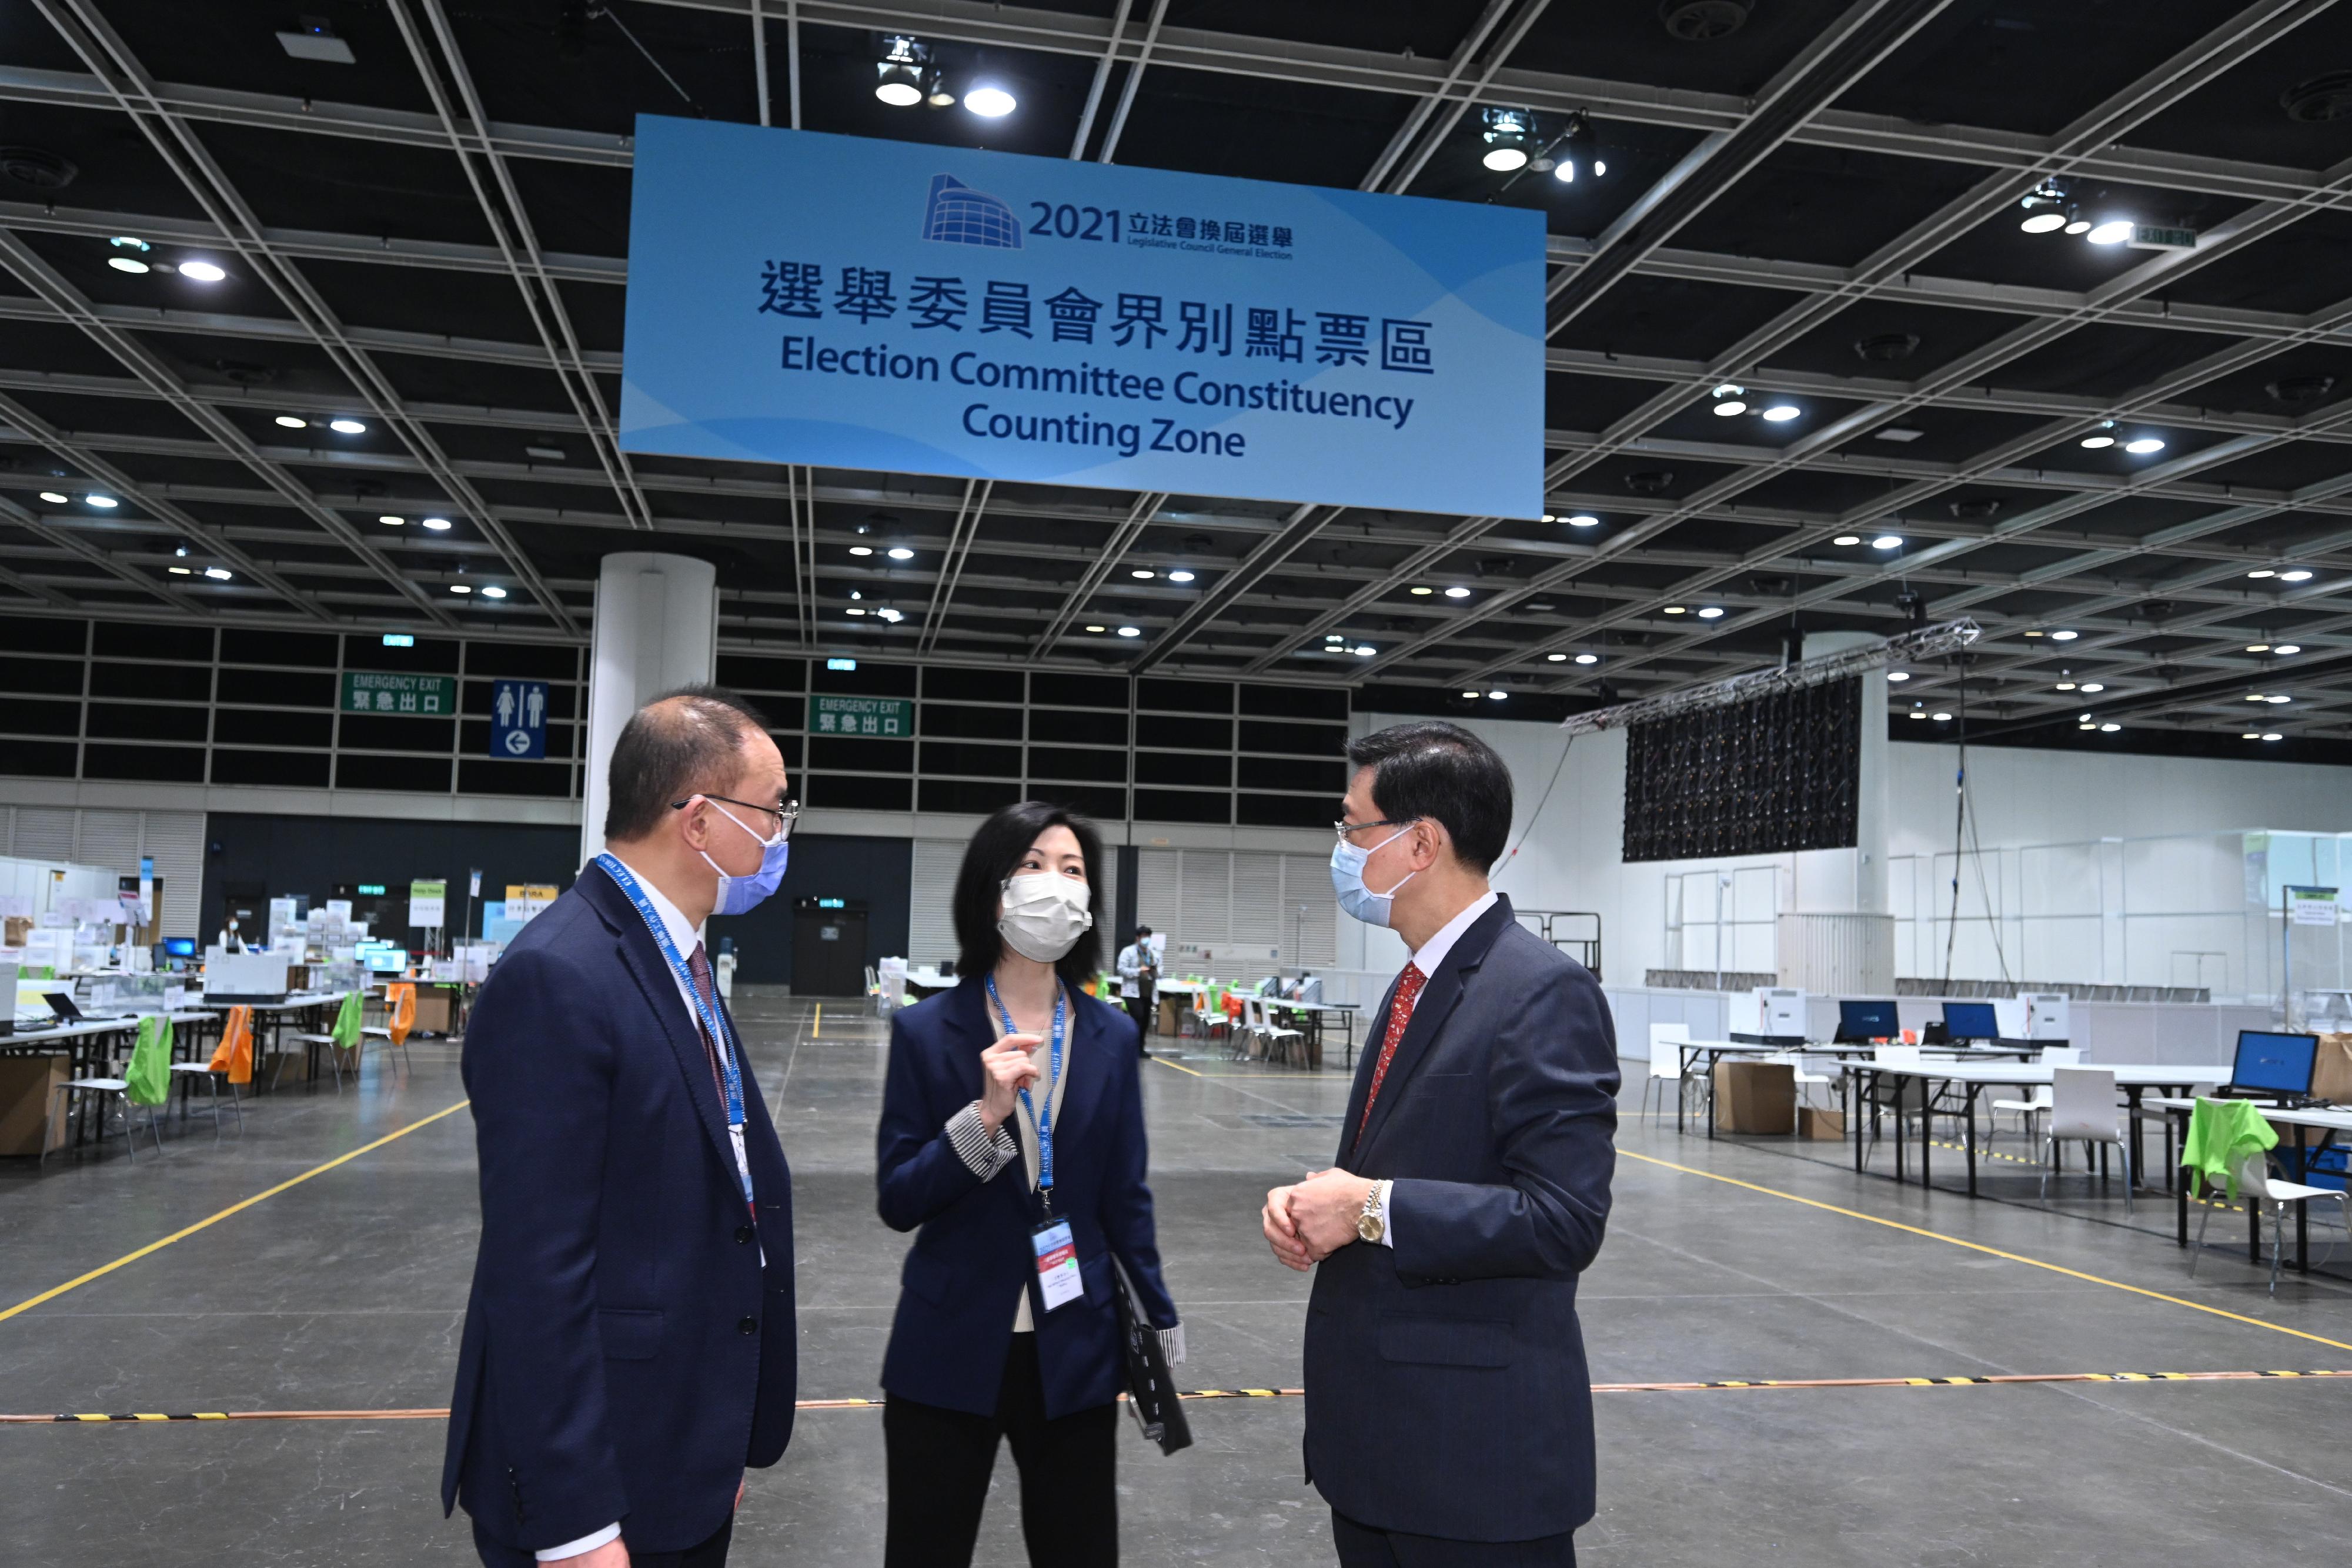 The Chief Secretary for Administration, Mr John Lee, visited the Hong Kong Convention and Exhibition Centre today (December 17) to inspect the preparatory work progress of the central counting station for the Legislative Council General Election. Photo shows Mr Lee (first right) and the Secretary for Constitutional and Mainland Affairs, Mr Erick Tsang Kwok-wai (first left), chatting with a staff member to learn about the preparation work of the Election Committee Constituency Counting Zone.